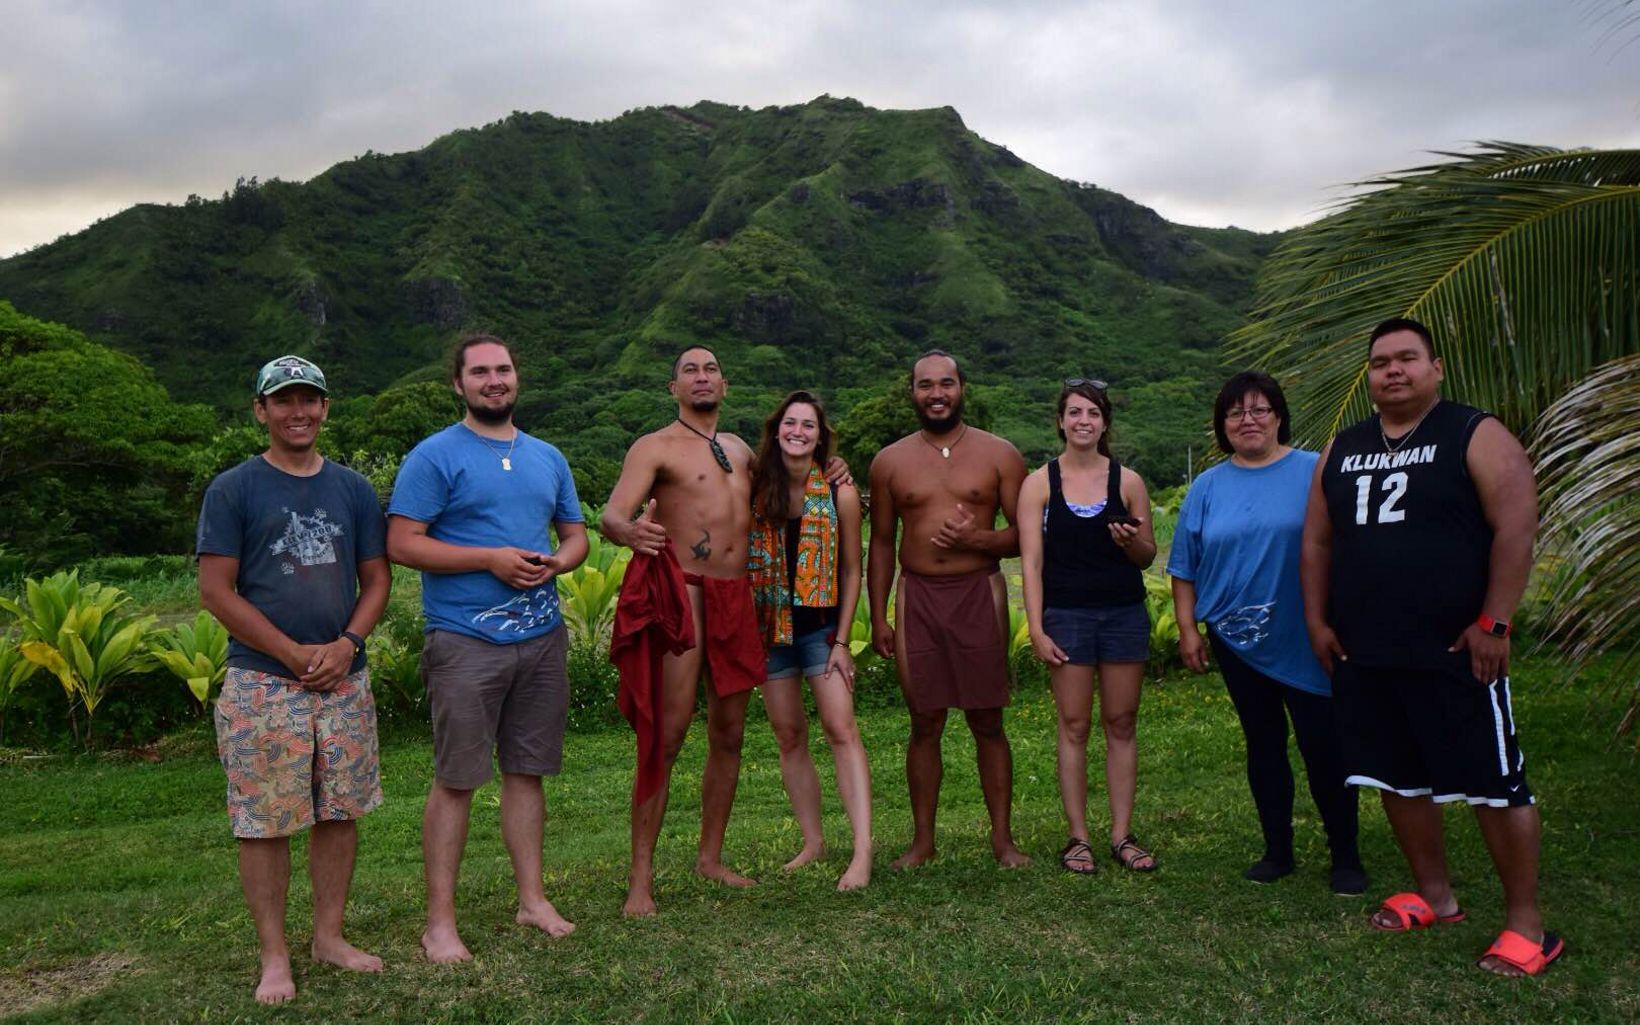 Eight Indigenous people stand for a group photo, with verdant mountains in the background.